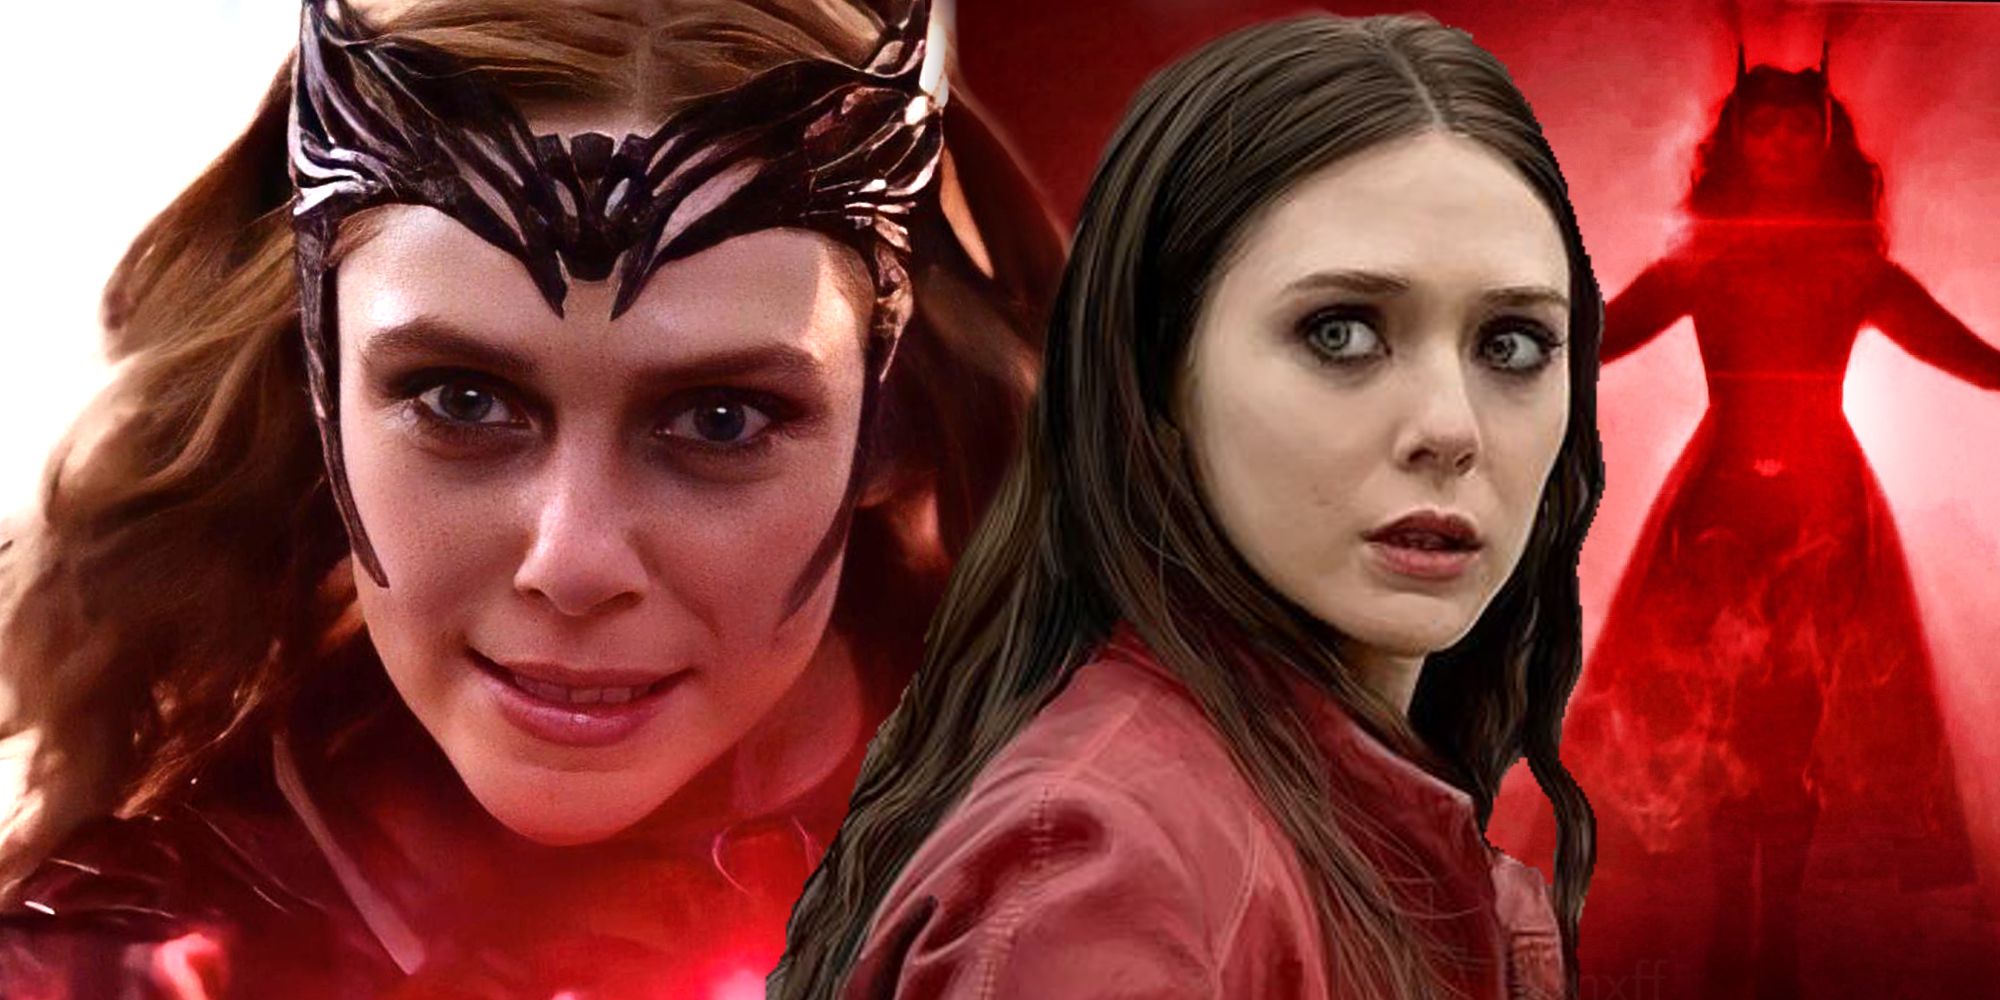 Scarlet Witch as a Hero and Villain in the MCU